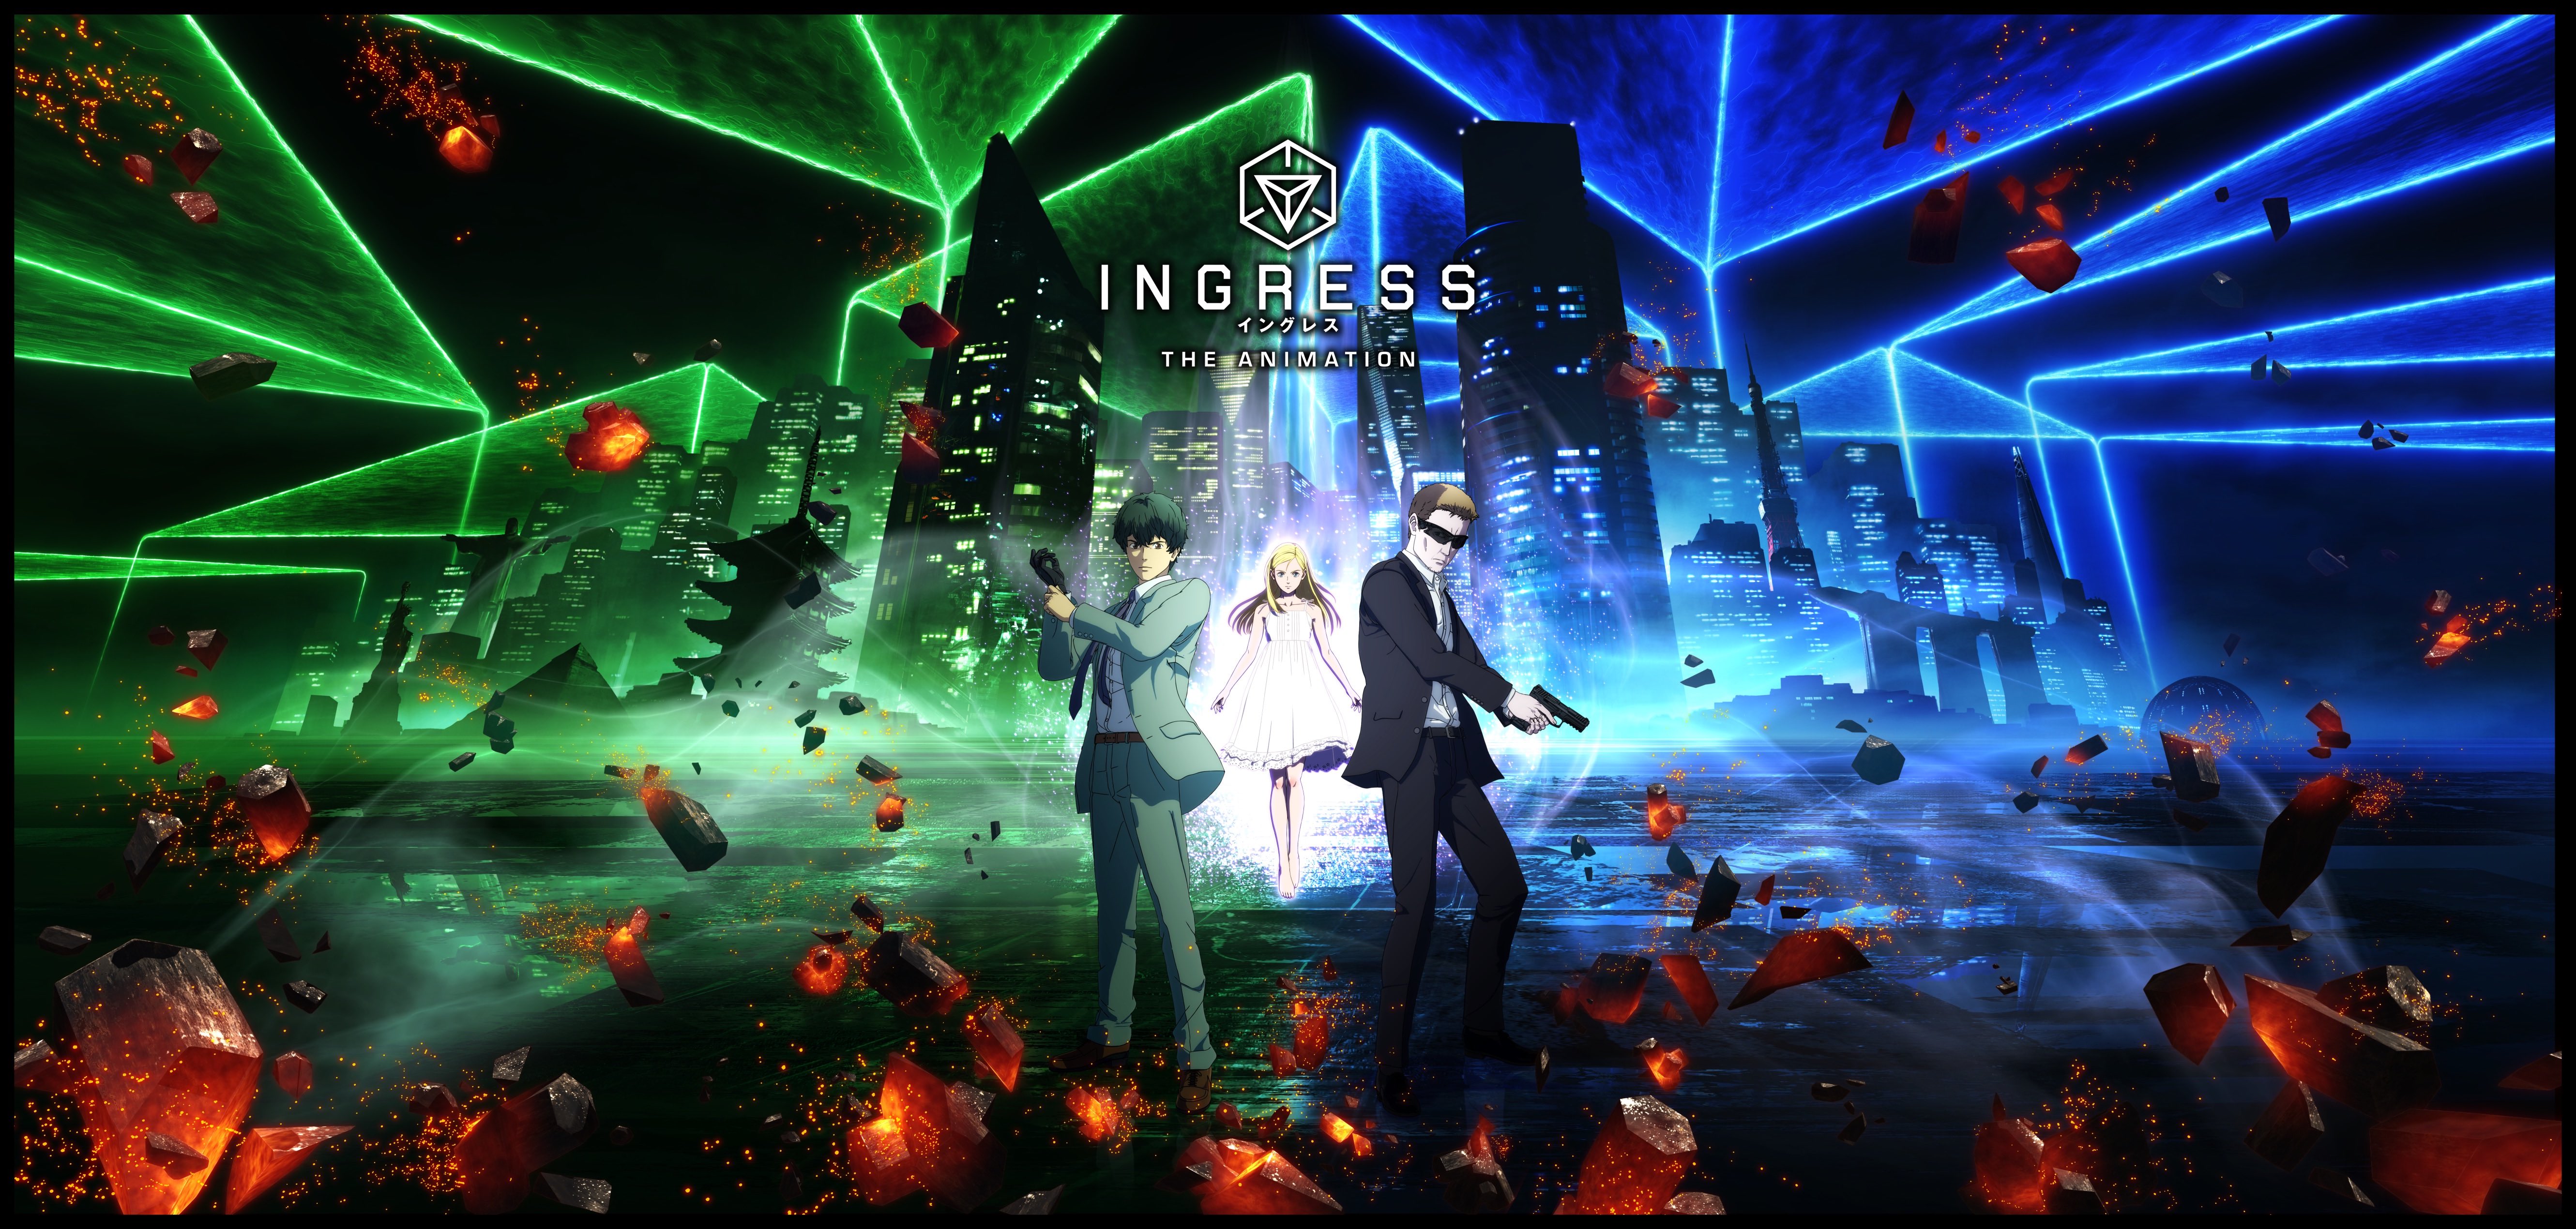 ingress wallpaper,performance,stage,event,music venue,games